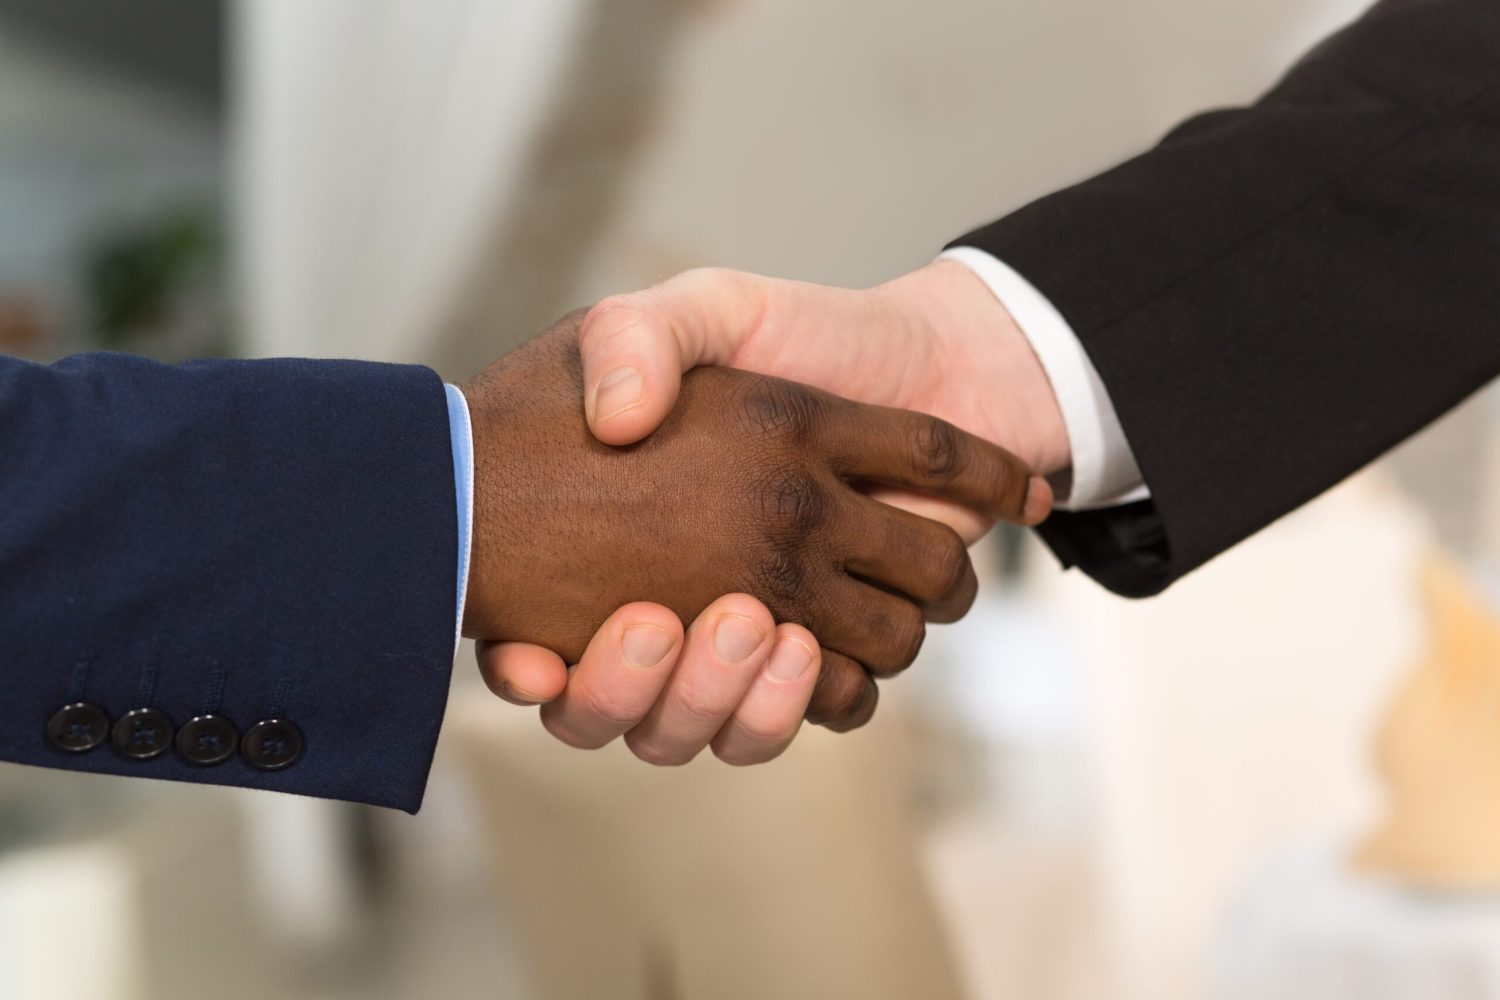 Close-up portrait of business people shaking hands. People showing mutual agreement betweent their companies or enterprises.